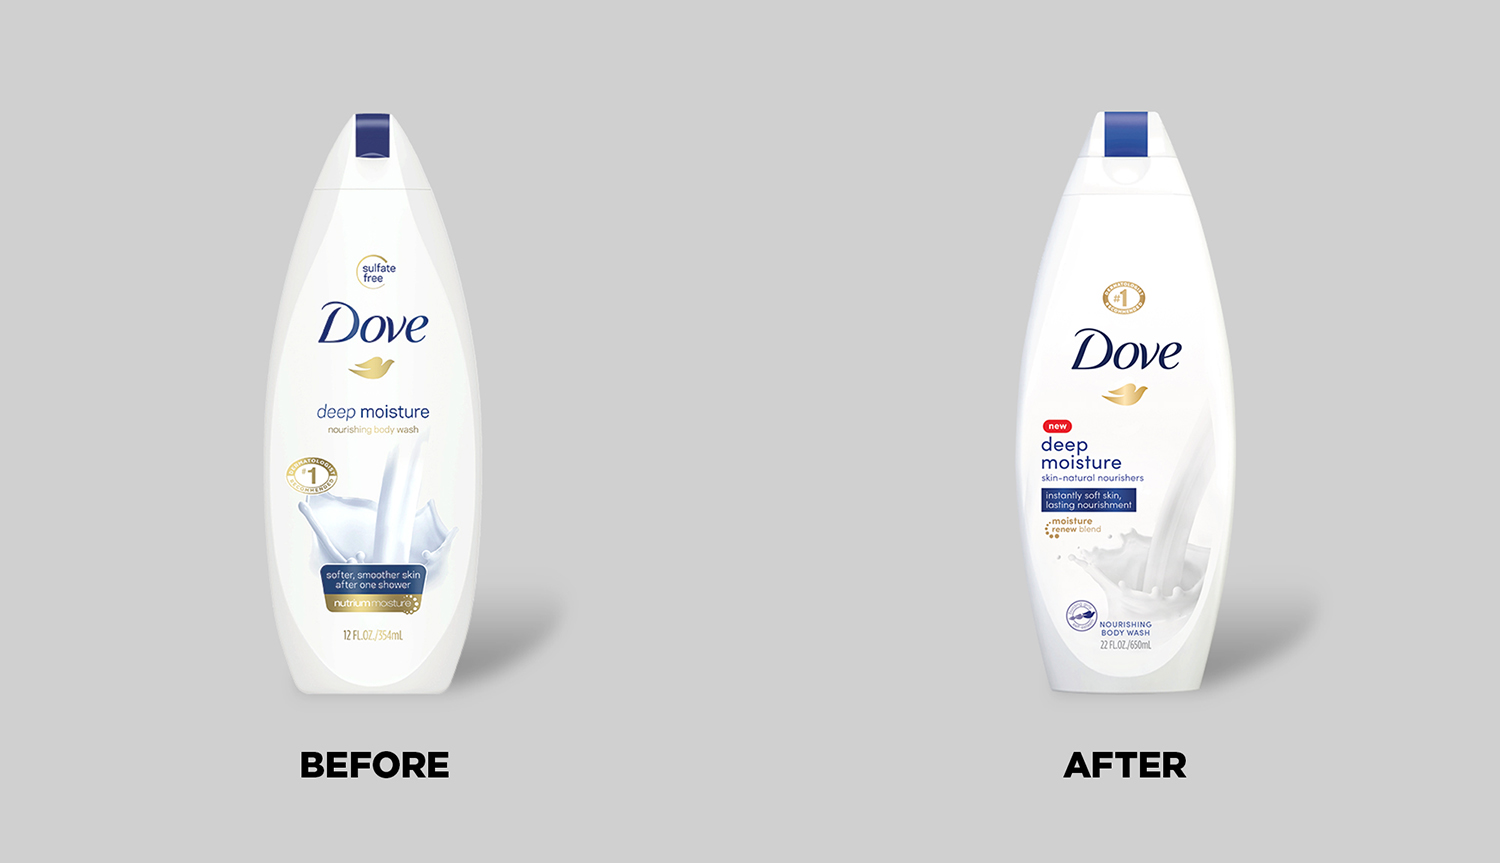 Dove Body Wash Revitalized Its Packaging—and Cleaned Up in Market | Dieline Design, Branding & Packaging Inspiration